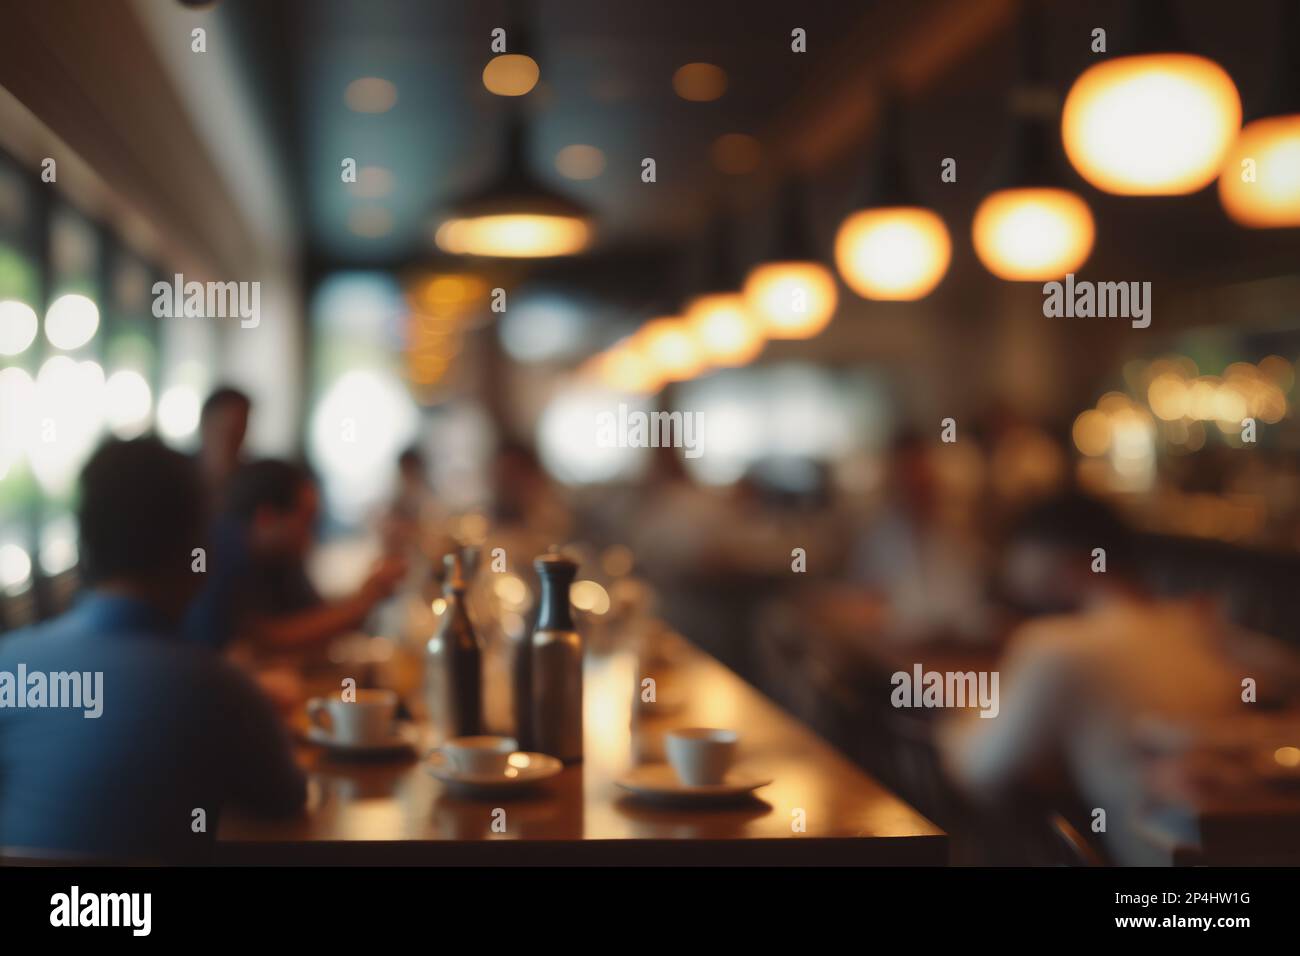 Blur people in cafe,restaurant with light abstract bokeh background Stock Photo